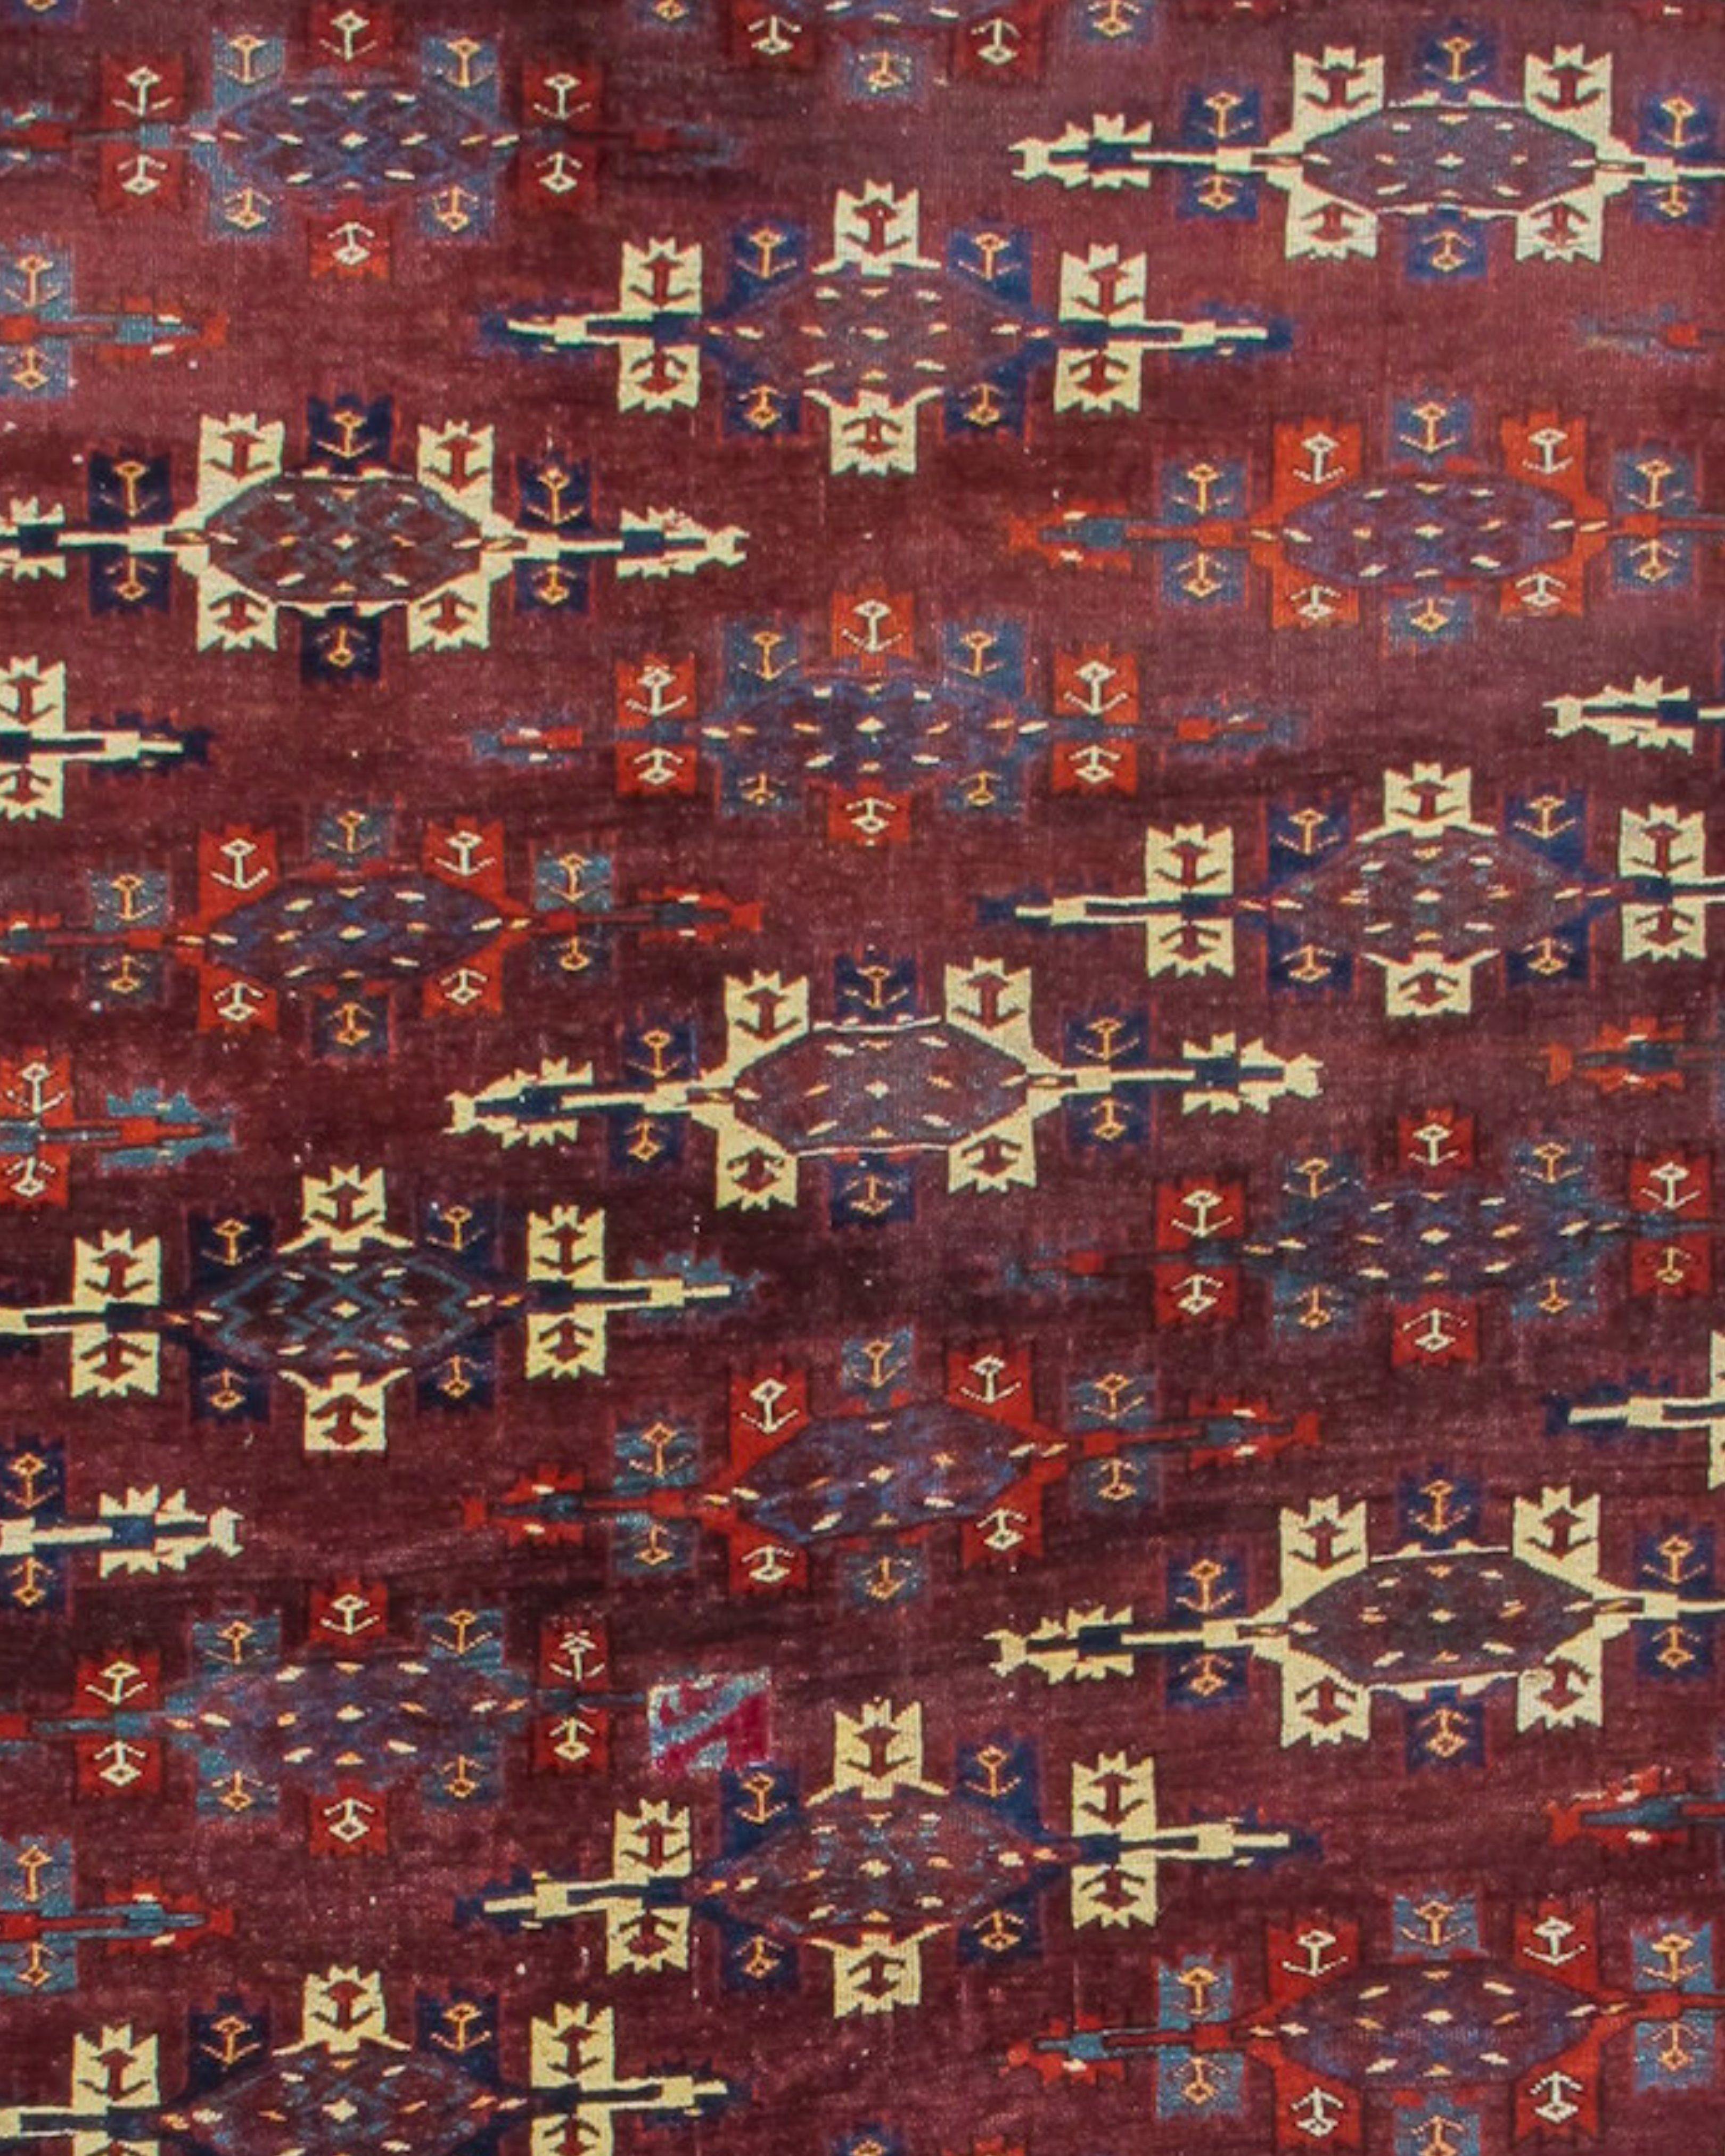 Antique Turkmen Yomut Main Carpet Rug, 19th Century

This classic Turkmen main carpet uses the so-called ‘kepse gul’ field design against a saturated plum madder ground. Elongated ‘kepse guls’ are drawn diagonally across the field alternating with